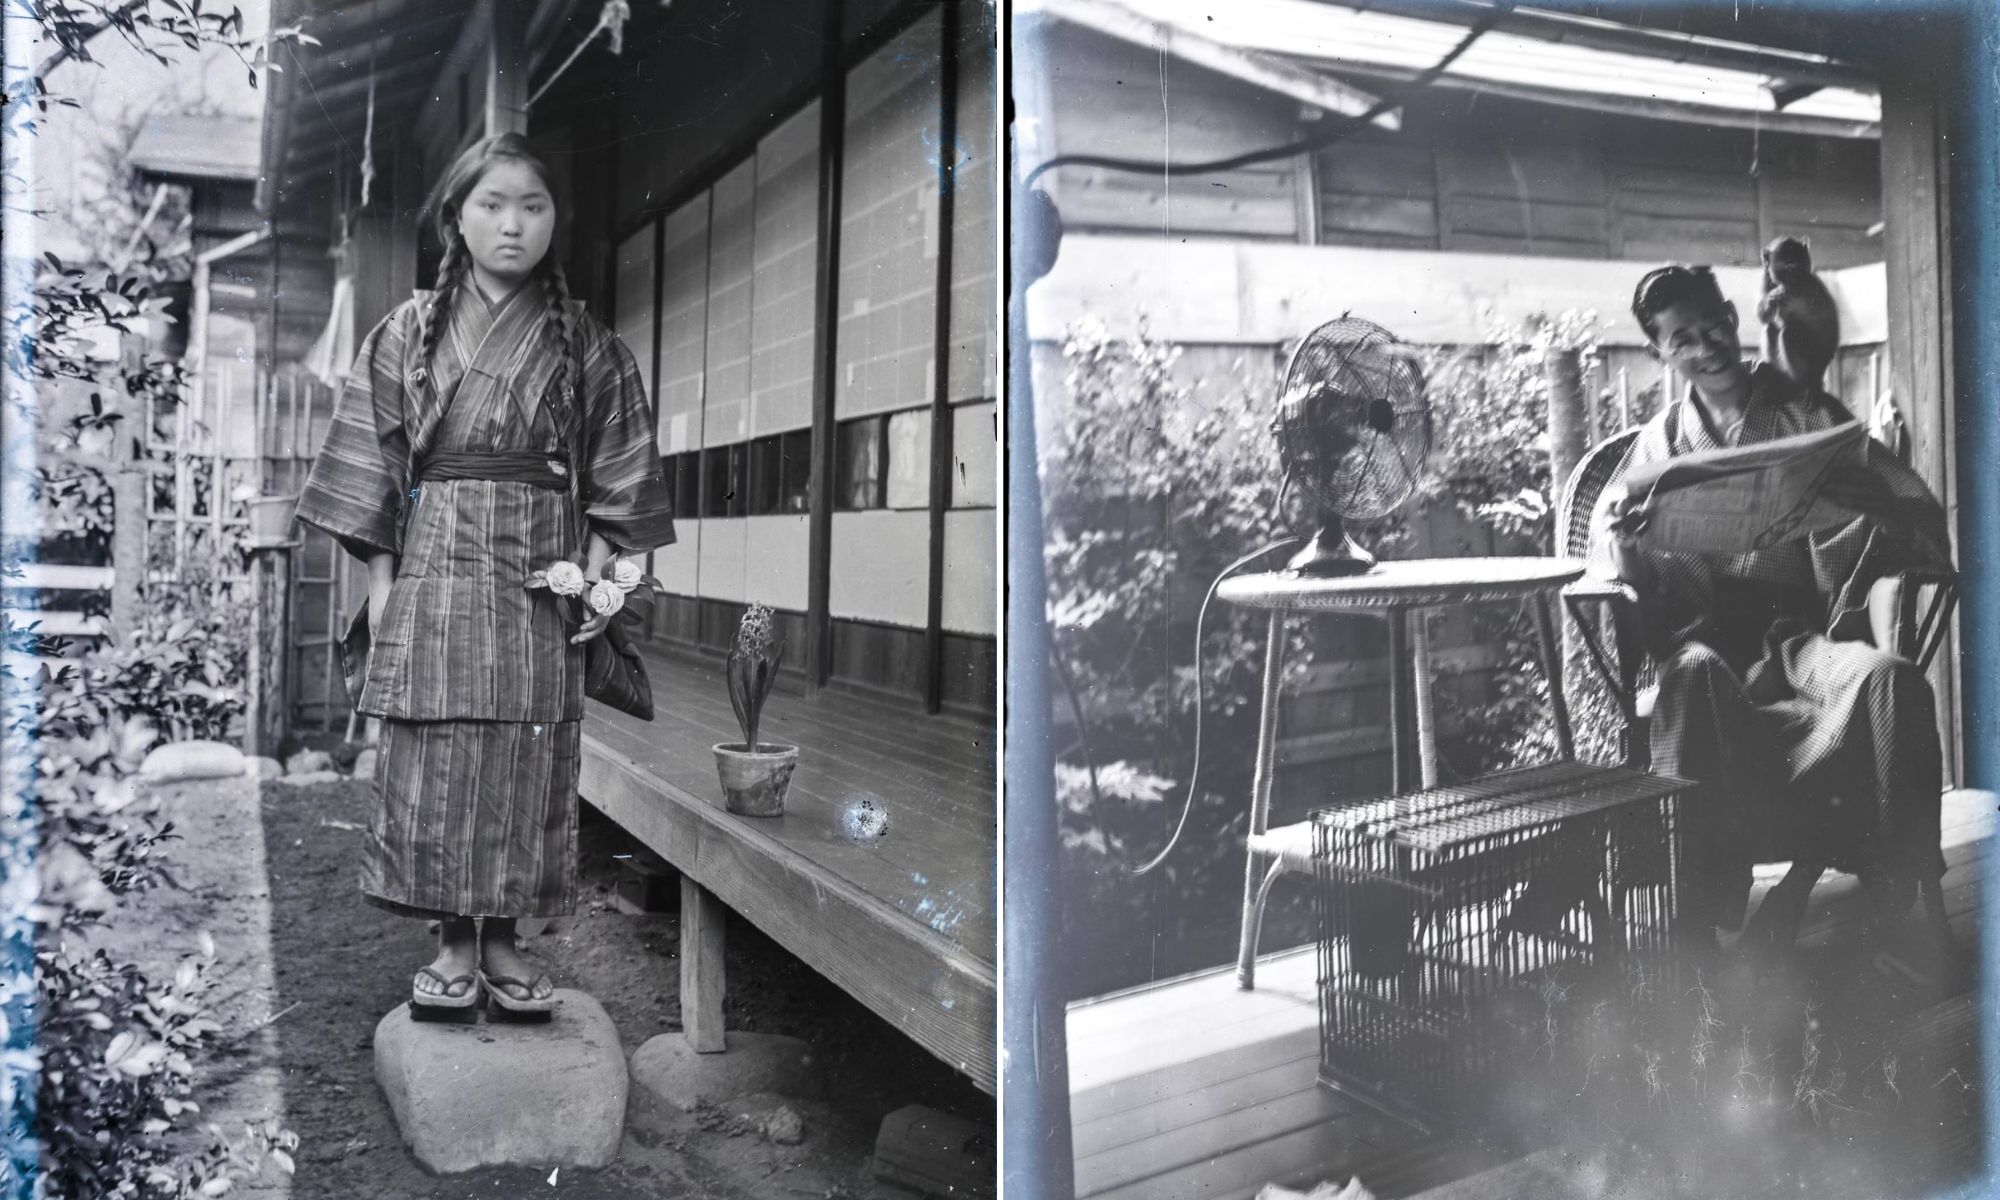 Abandoned places in Japan - Collage of glass plate negatives showing the Taisho Photographer's everyday life & possibly his daughter